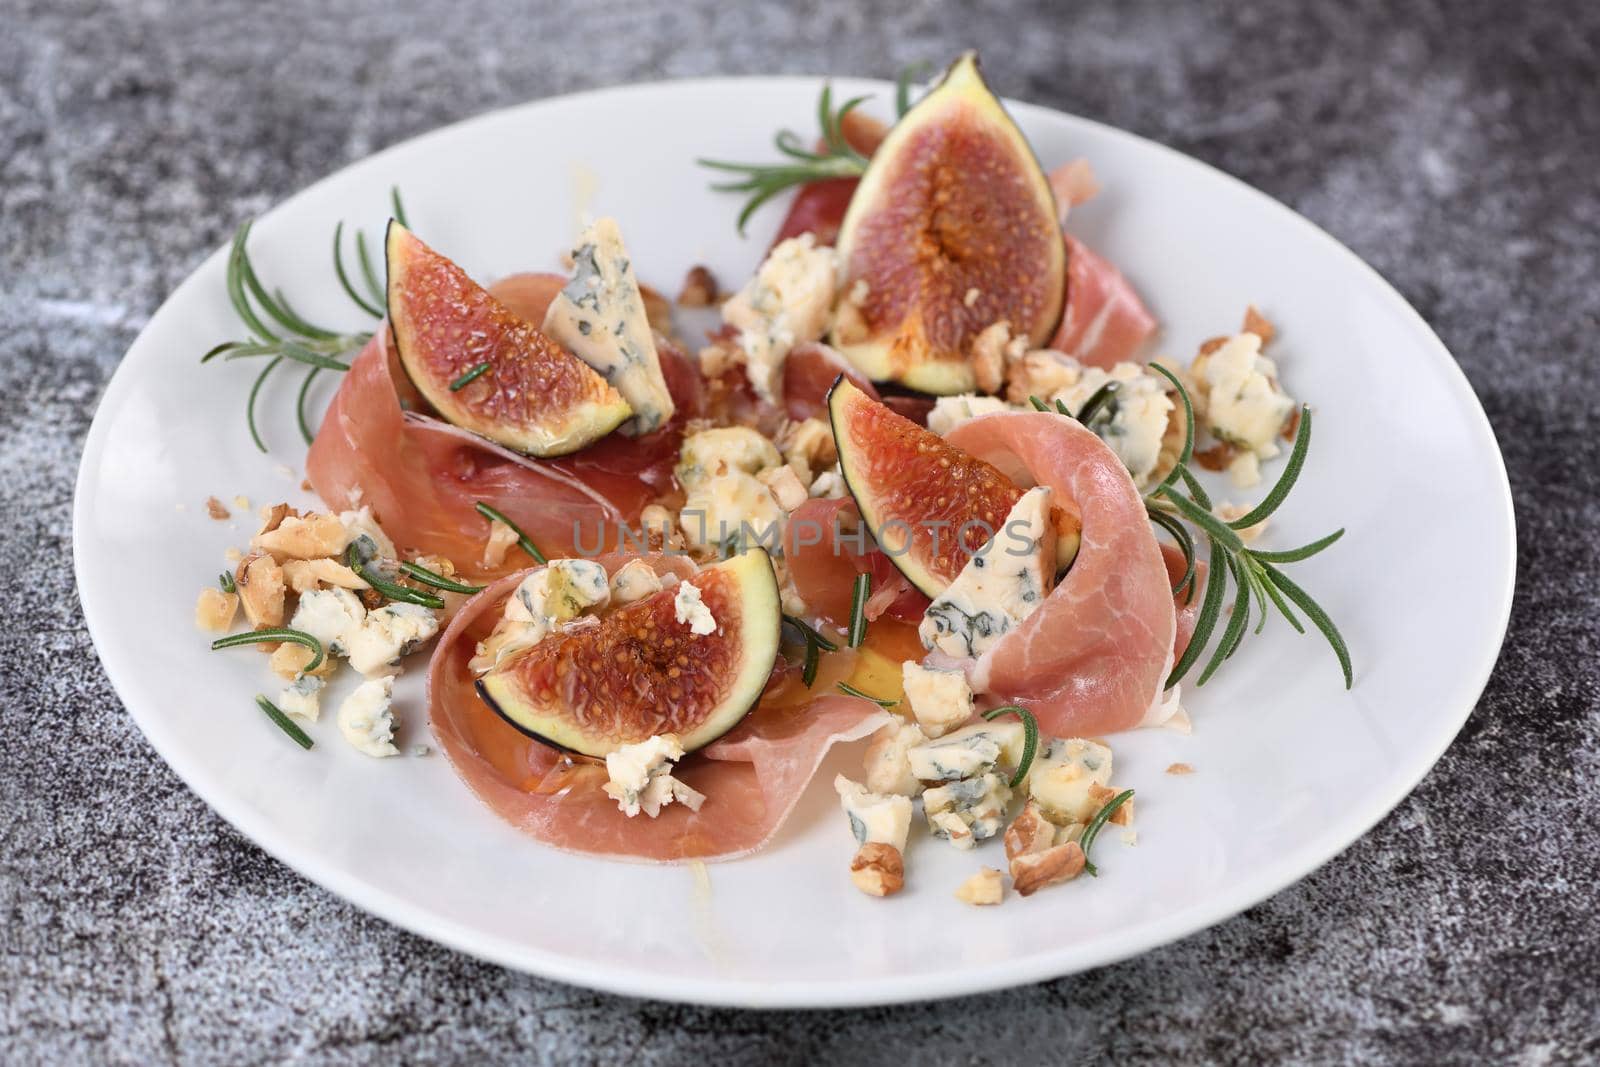 Figs with Parma ham by Apolonia